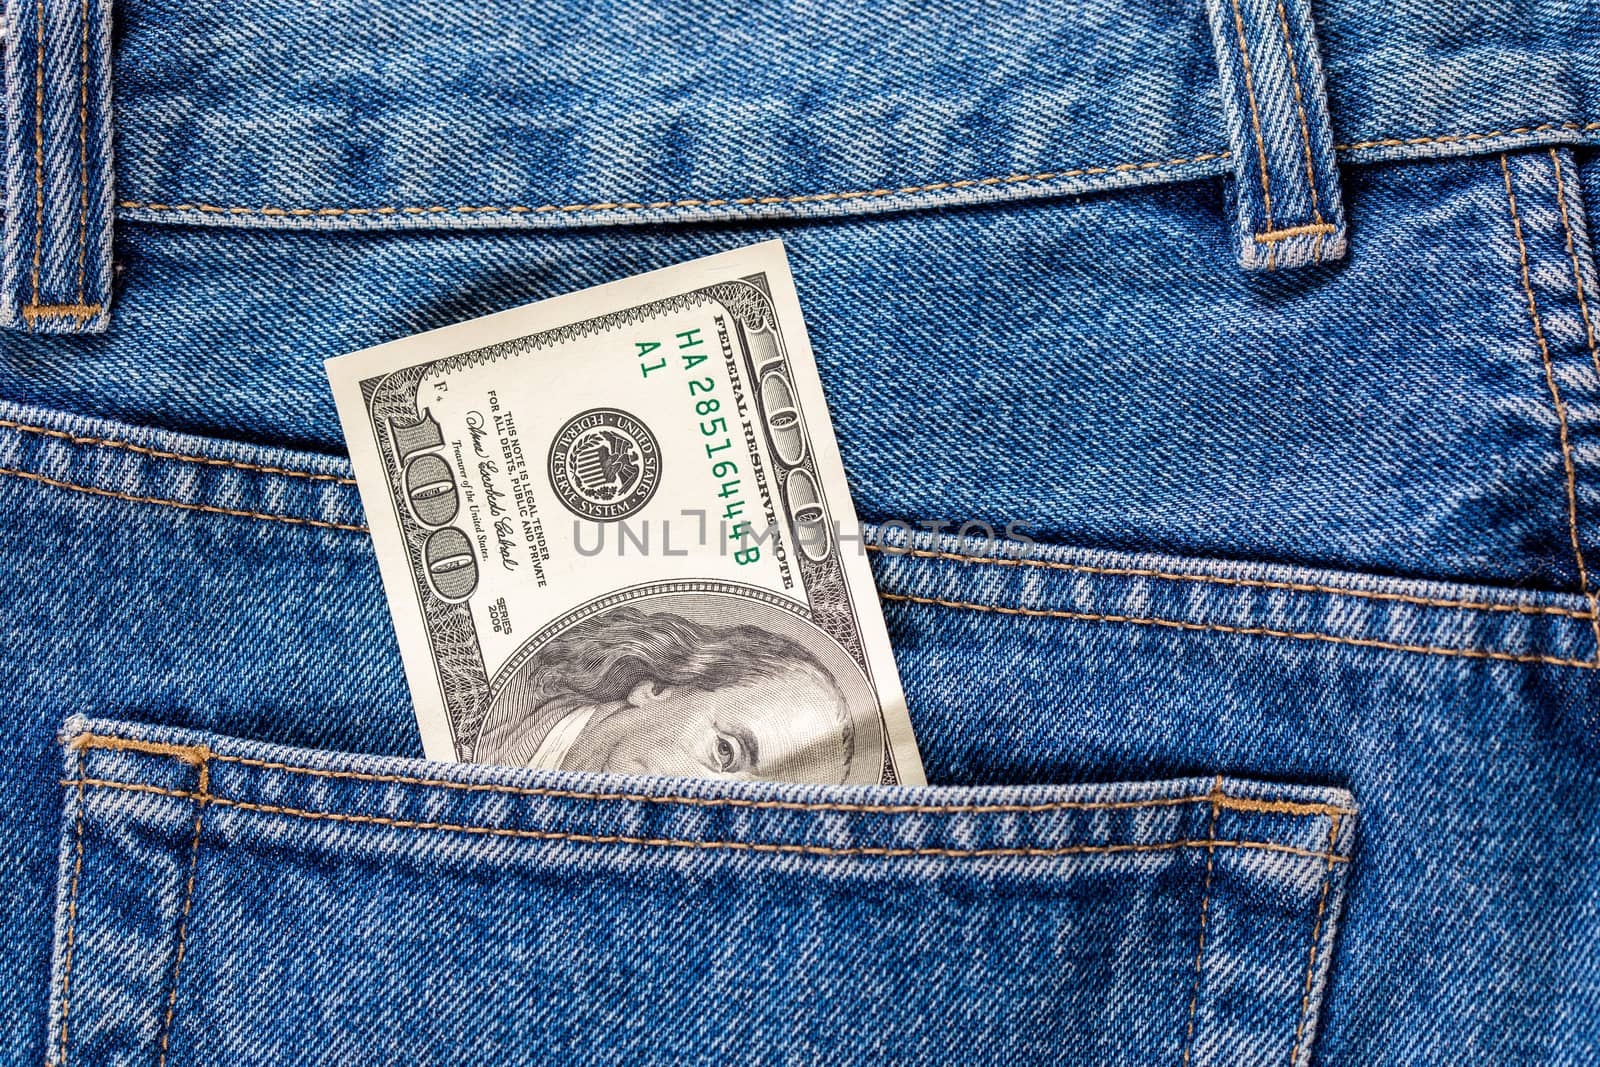 a hundred dollar banknote sticking out from rear jeans pocket - close-up.